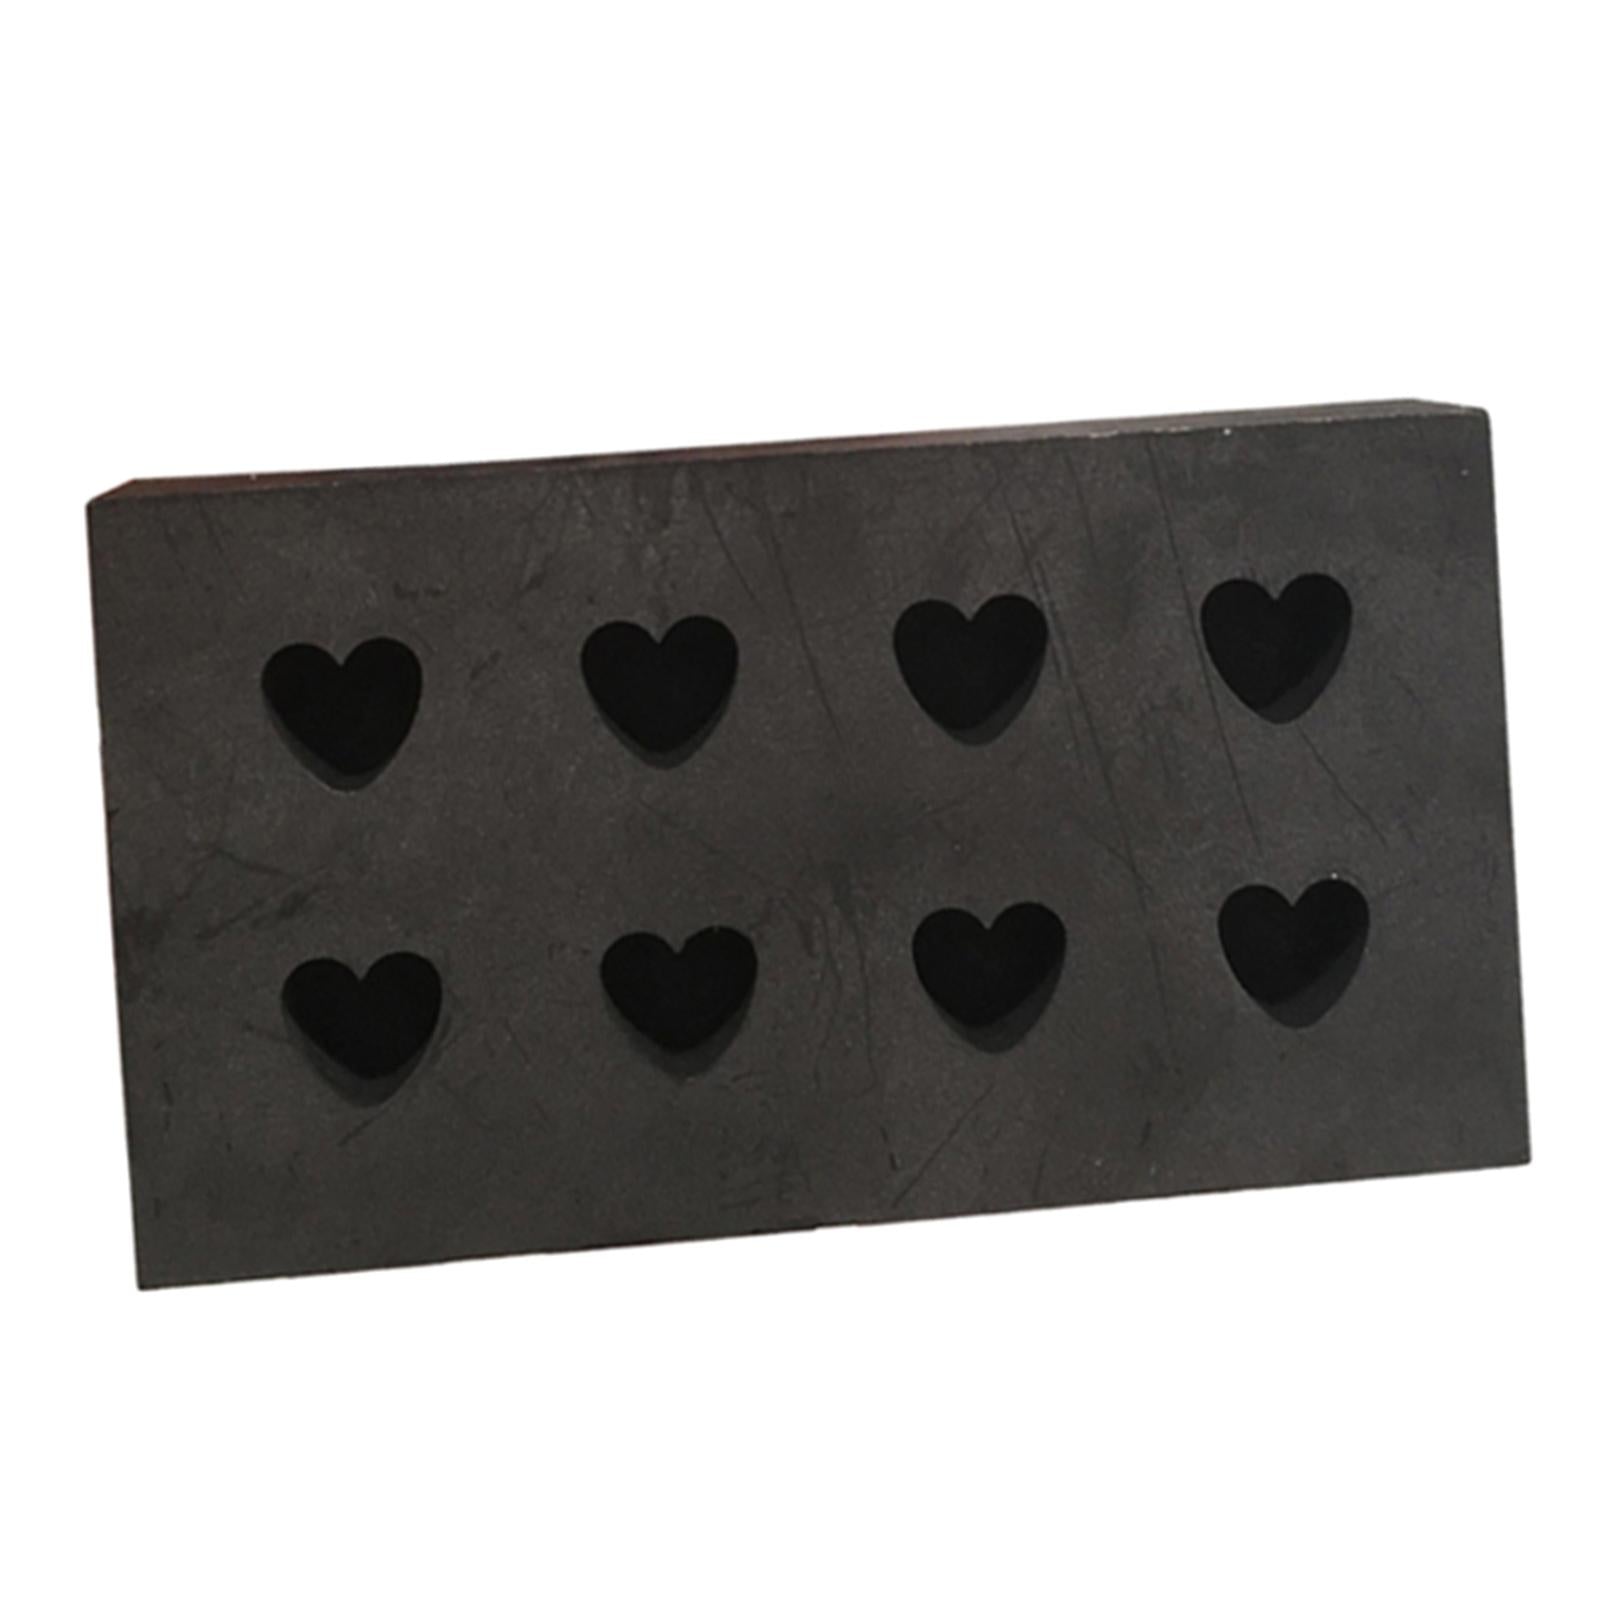 High Purity 8 Heart Shape Graphite Ingot Mold Metal Casting Mould Non-stick